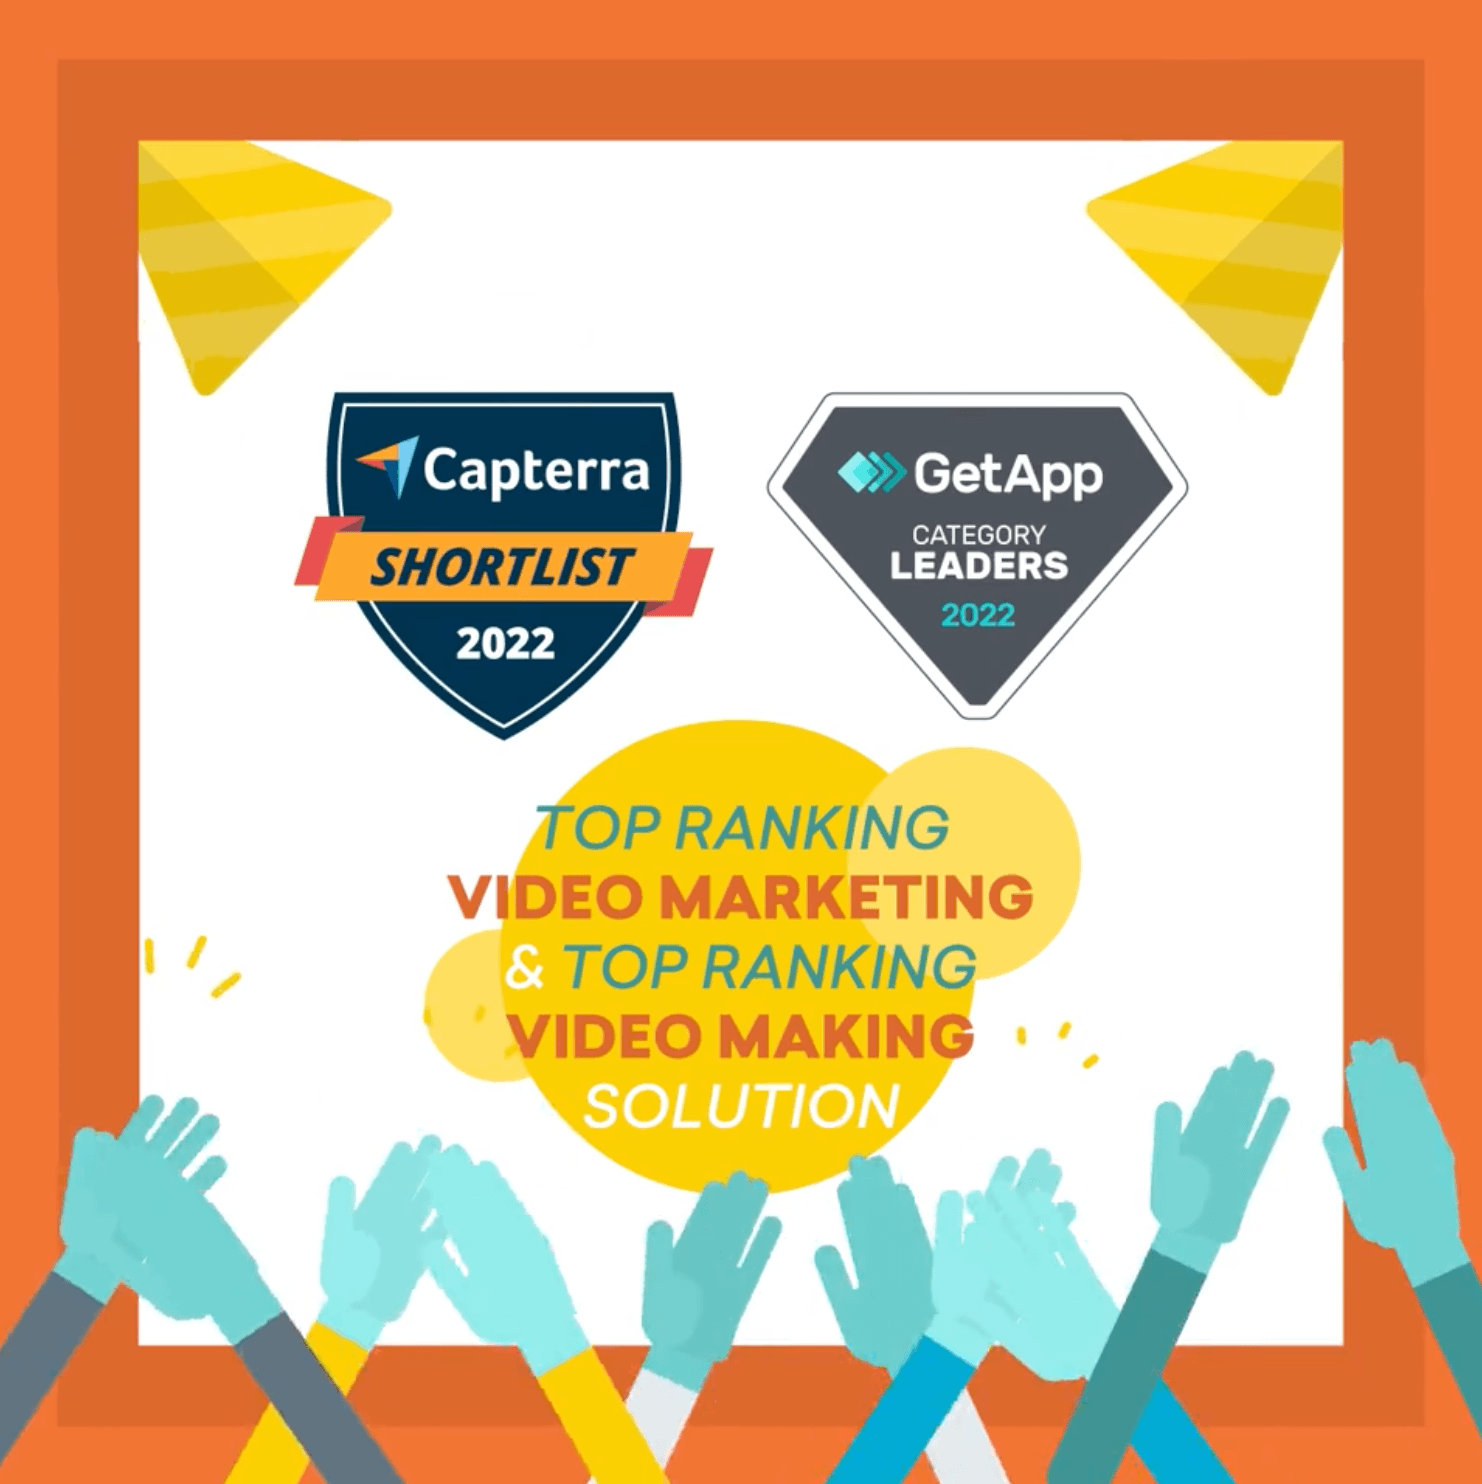 Vyond is named a video leader by Capterra and GetApp